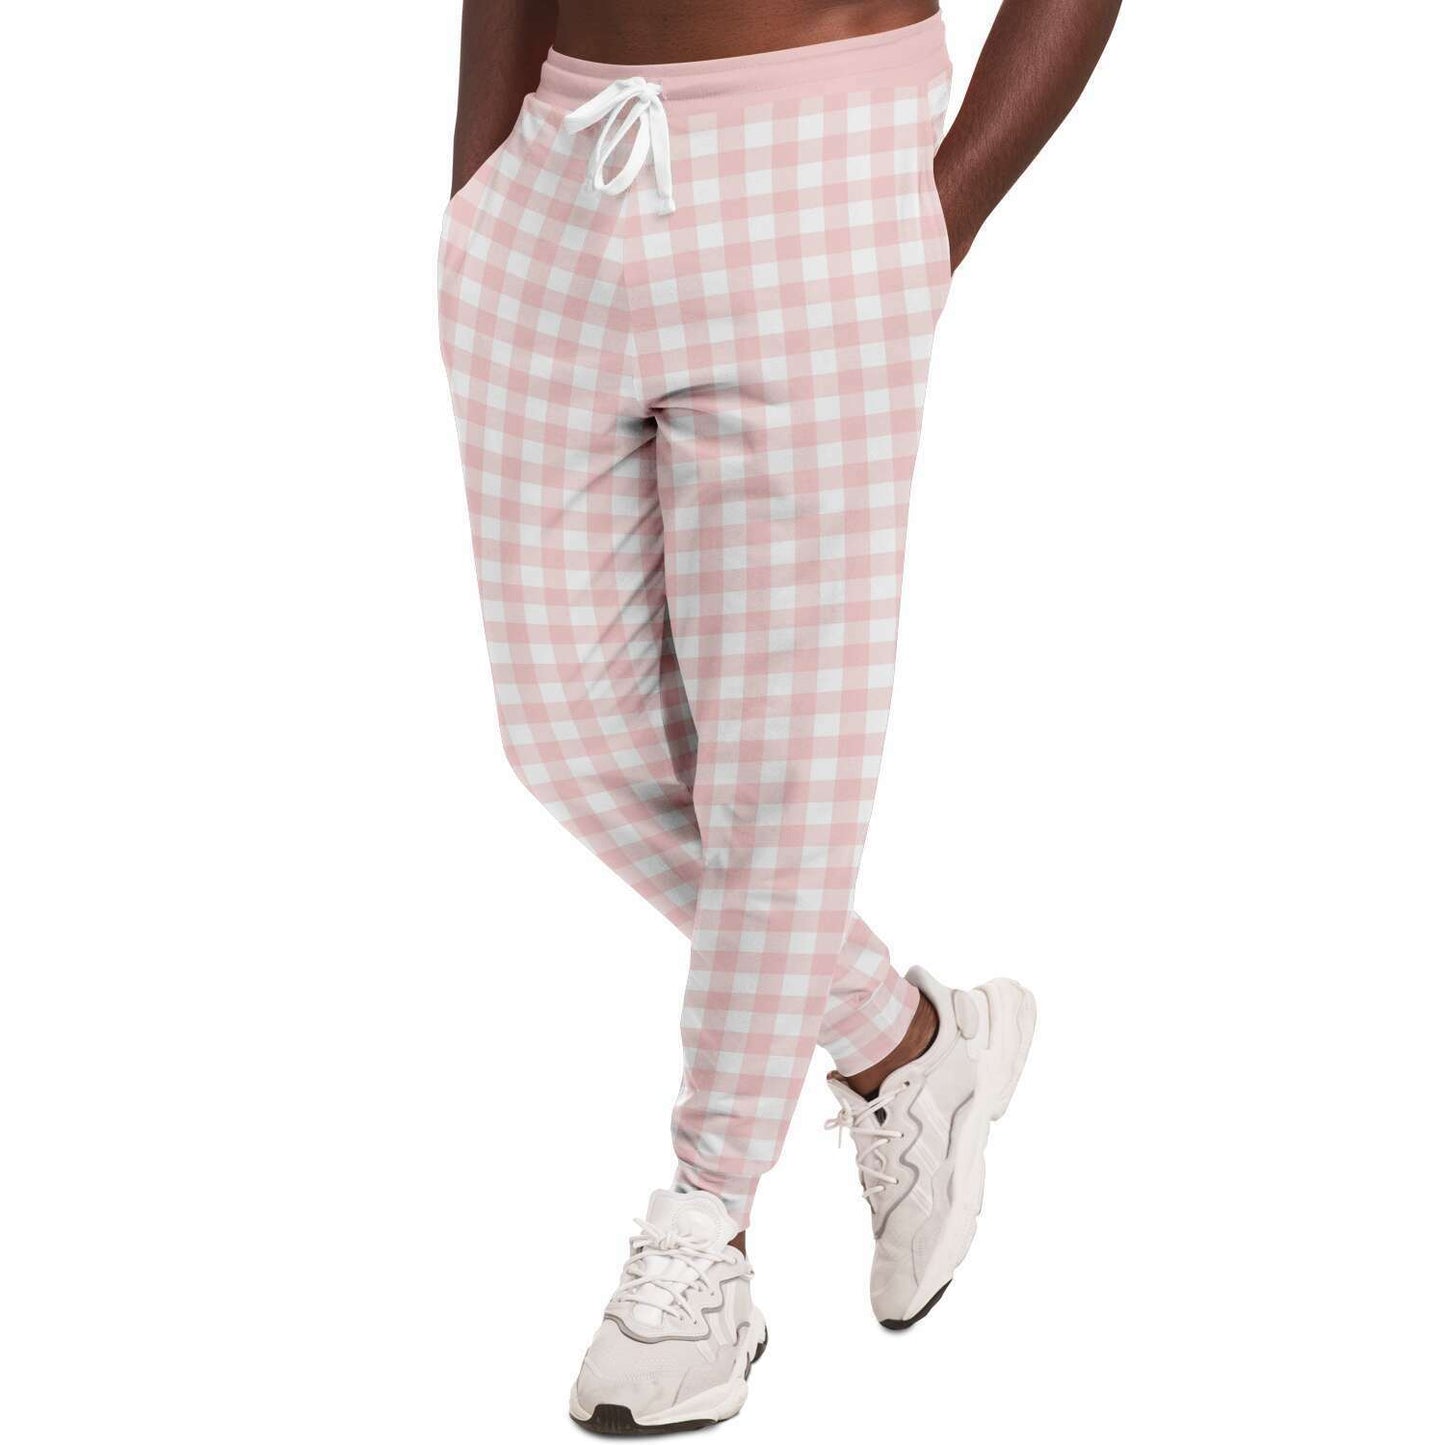 Pale Pink Gingham Check Unisex Fleece Joggers